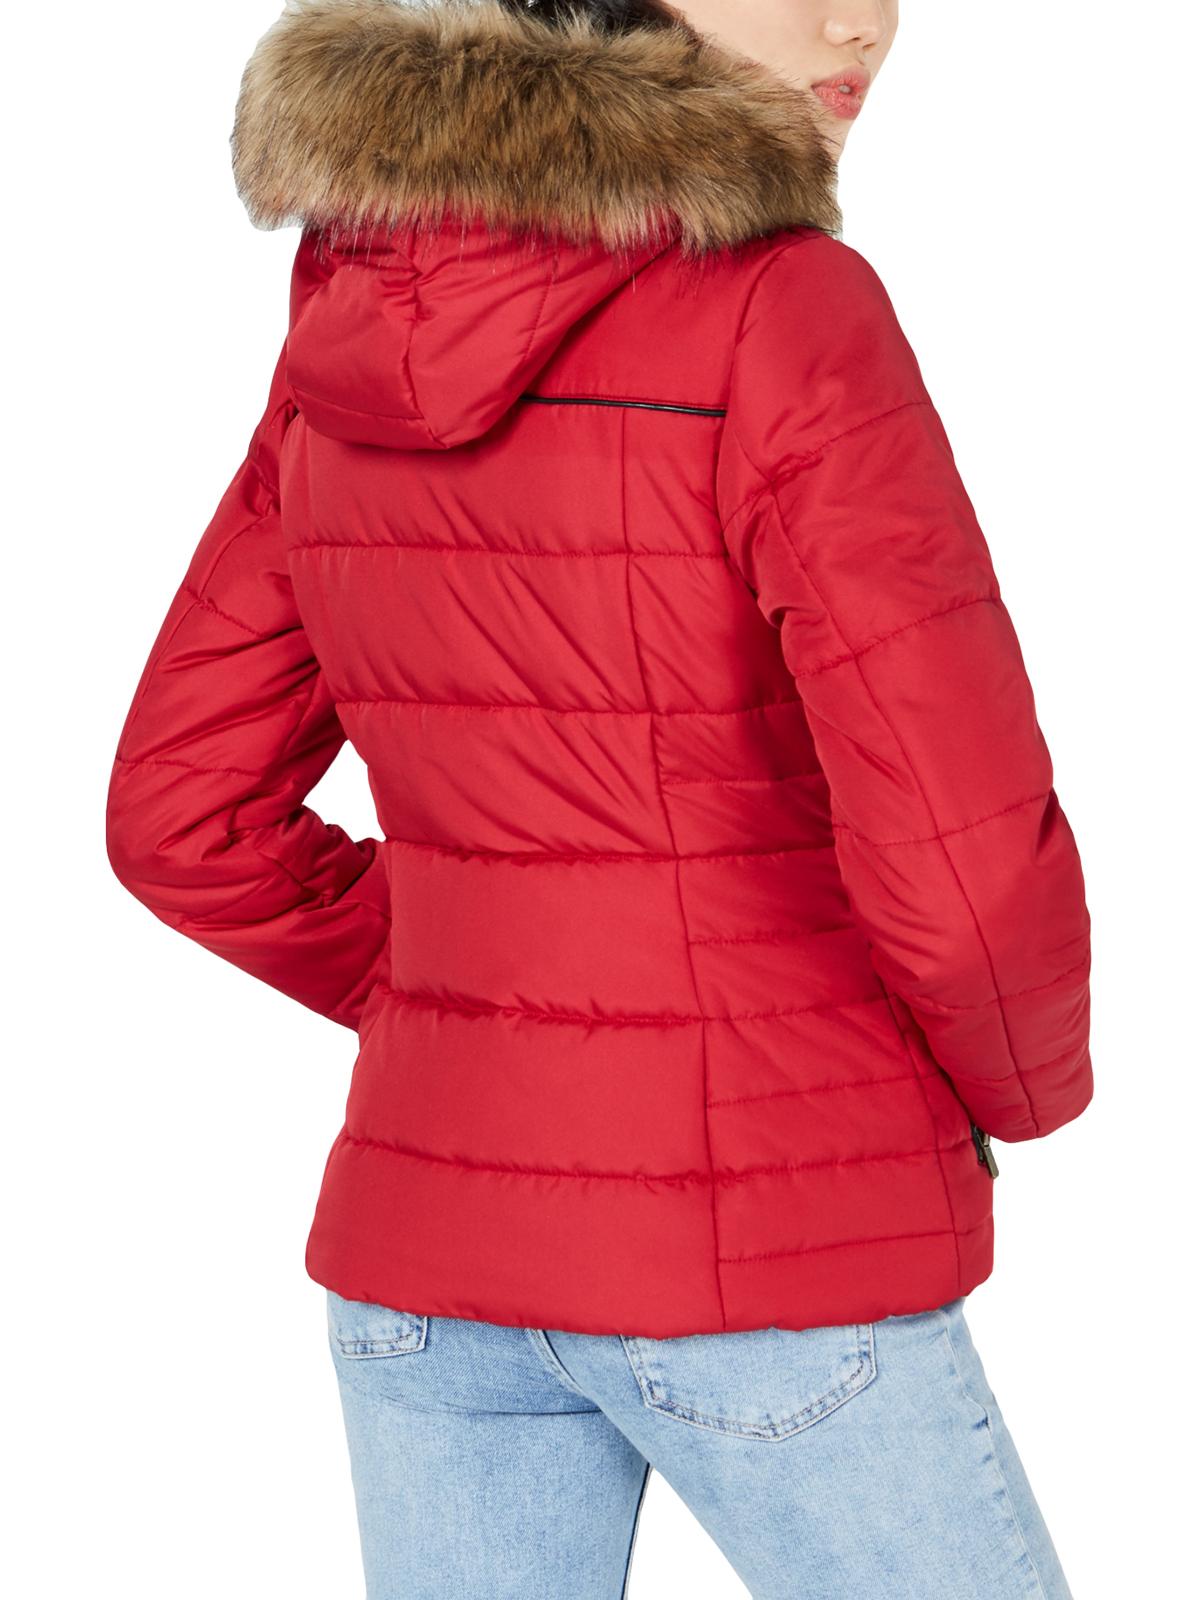 Celebrity Pink Womens Juniors Quilted Short Puffer Coat Red XL - image 2 of 2